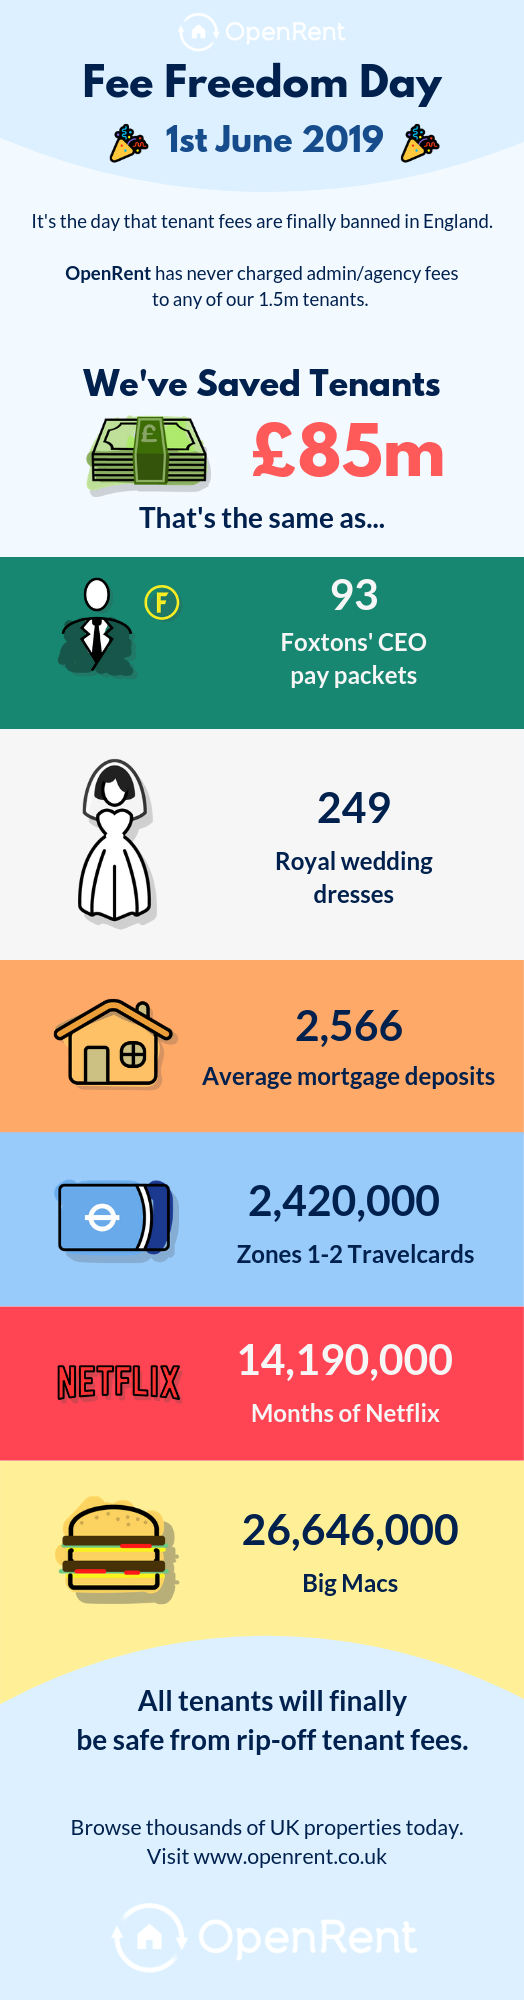 Tenant Fees Act Infographic about how much money OpenRent has saved tenants by not charging them fees.